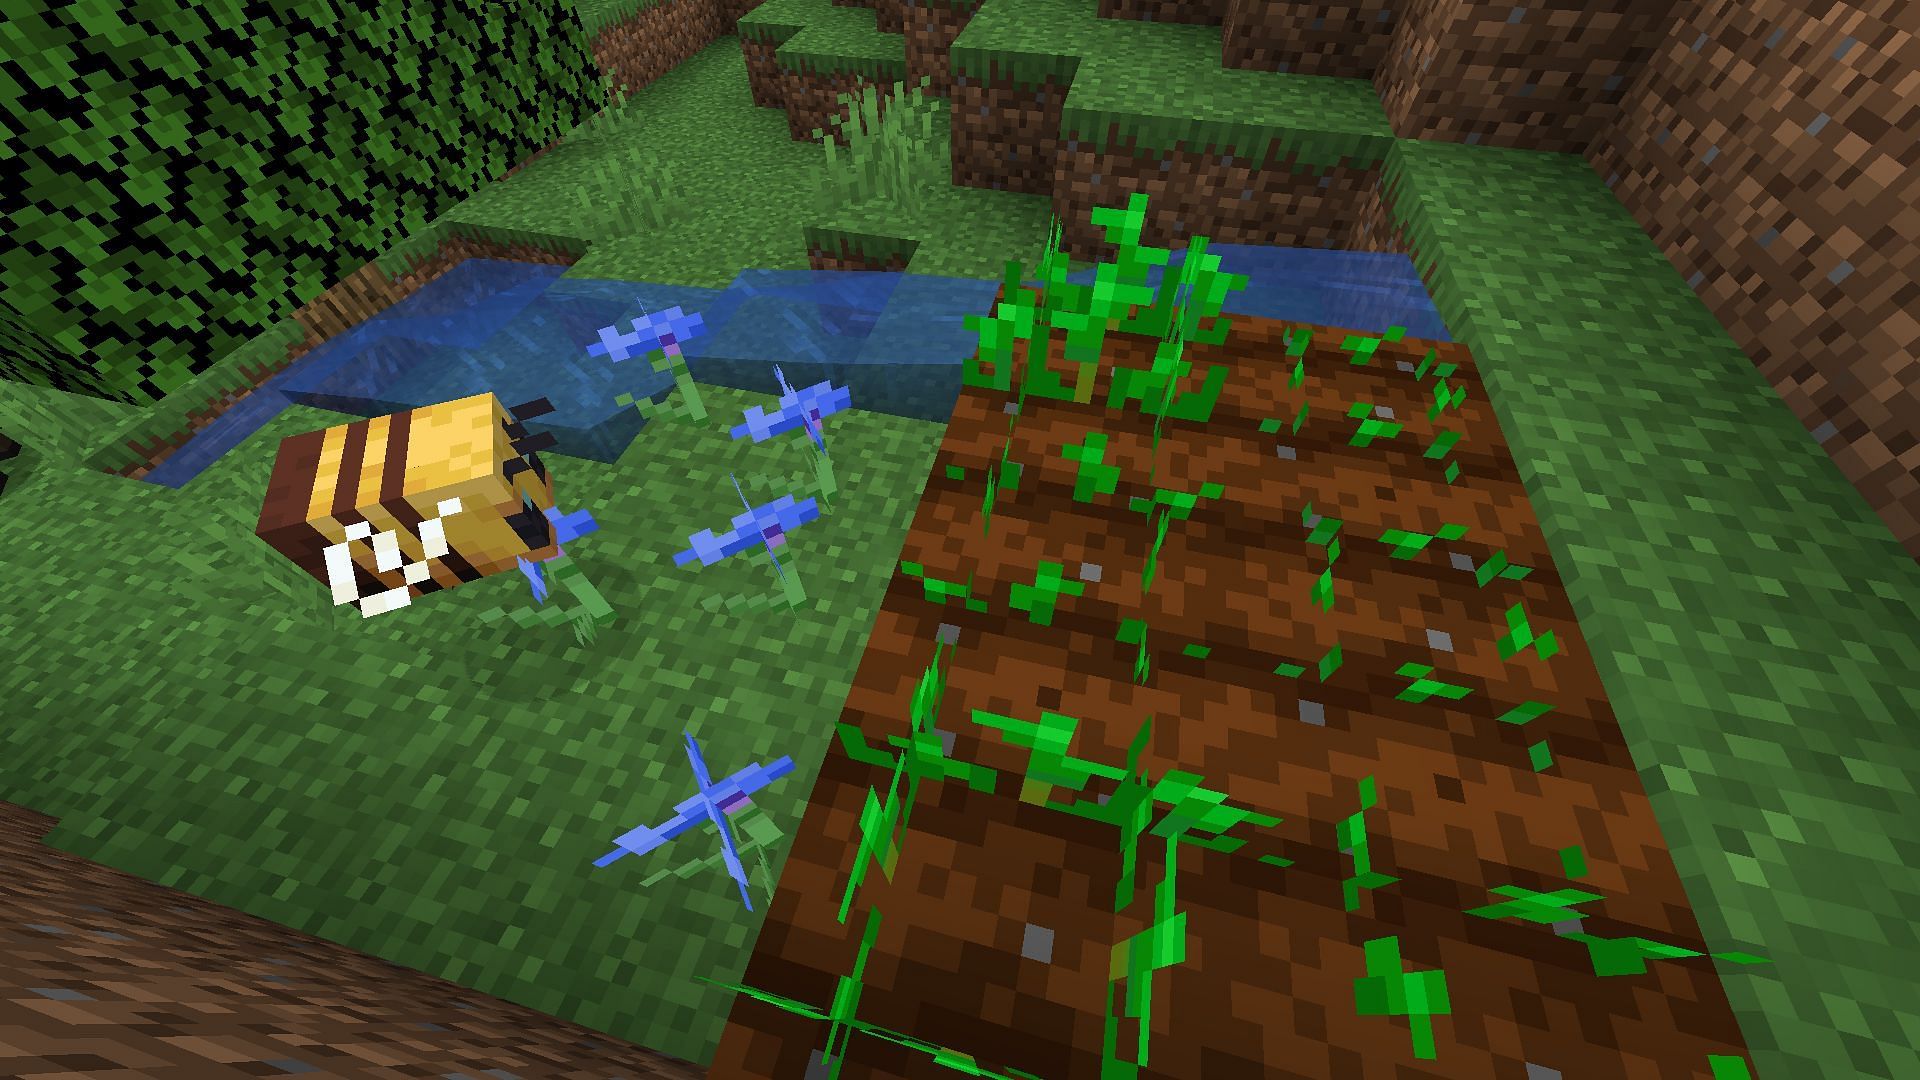 Bees with pollen can fertilize crops and catalyze their growth in Minecraft (Image via Mojang)